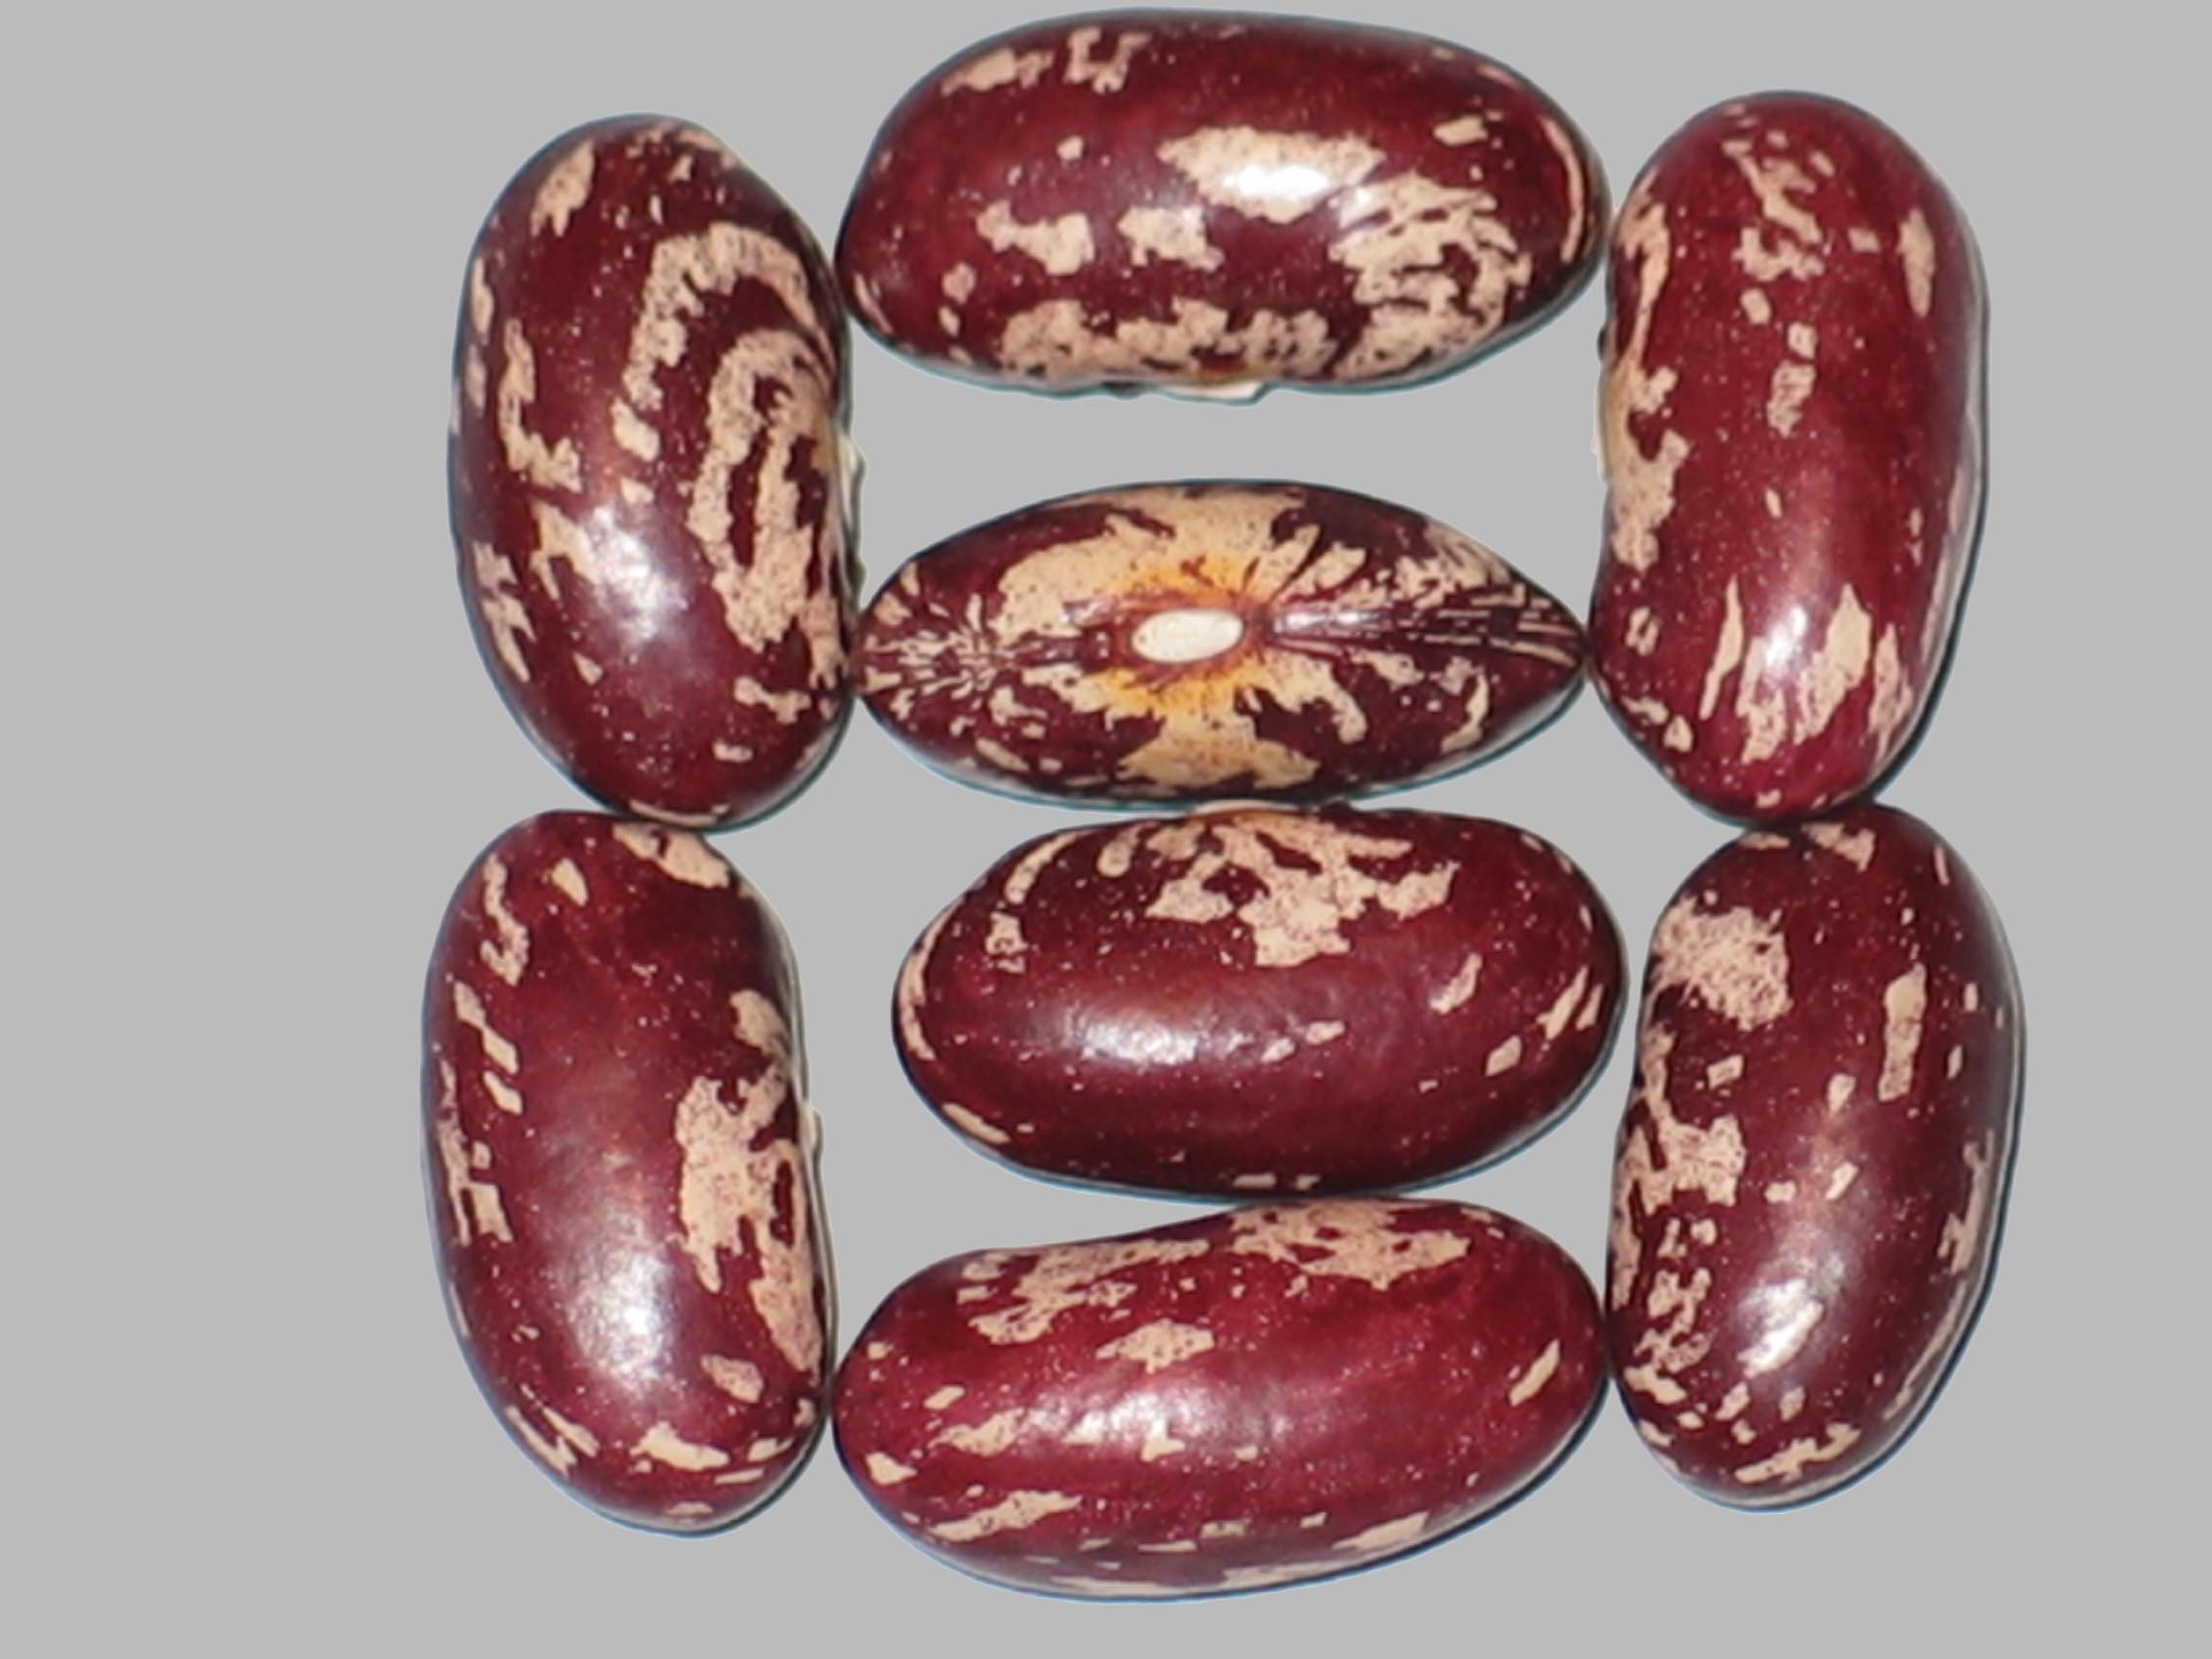 image of Shelleasy X Soldier beans